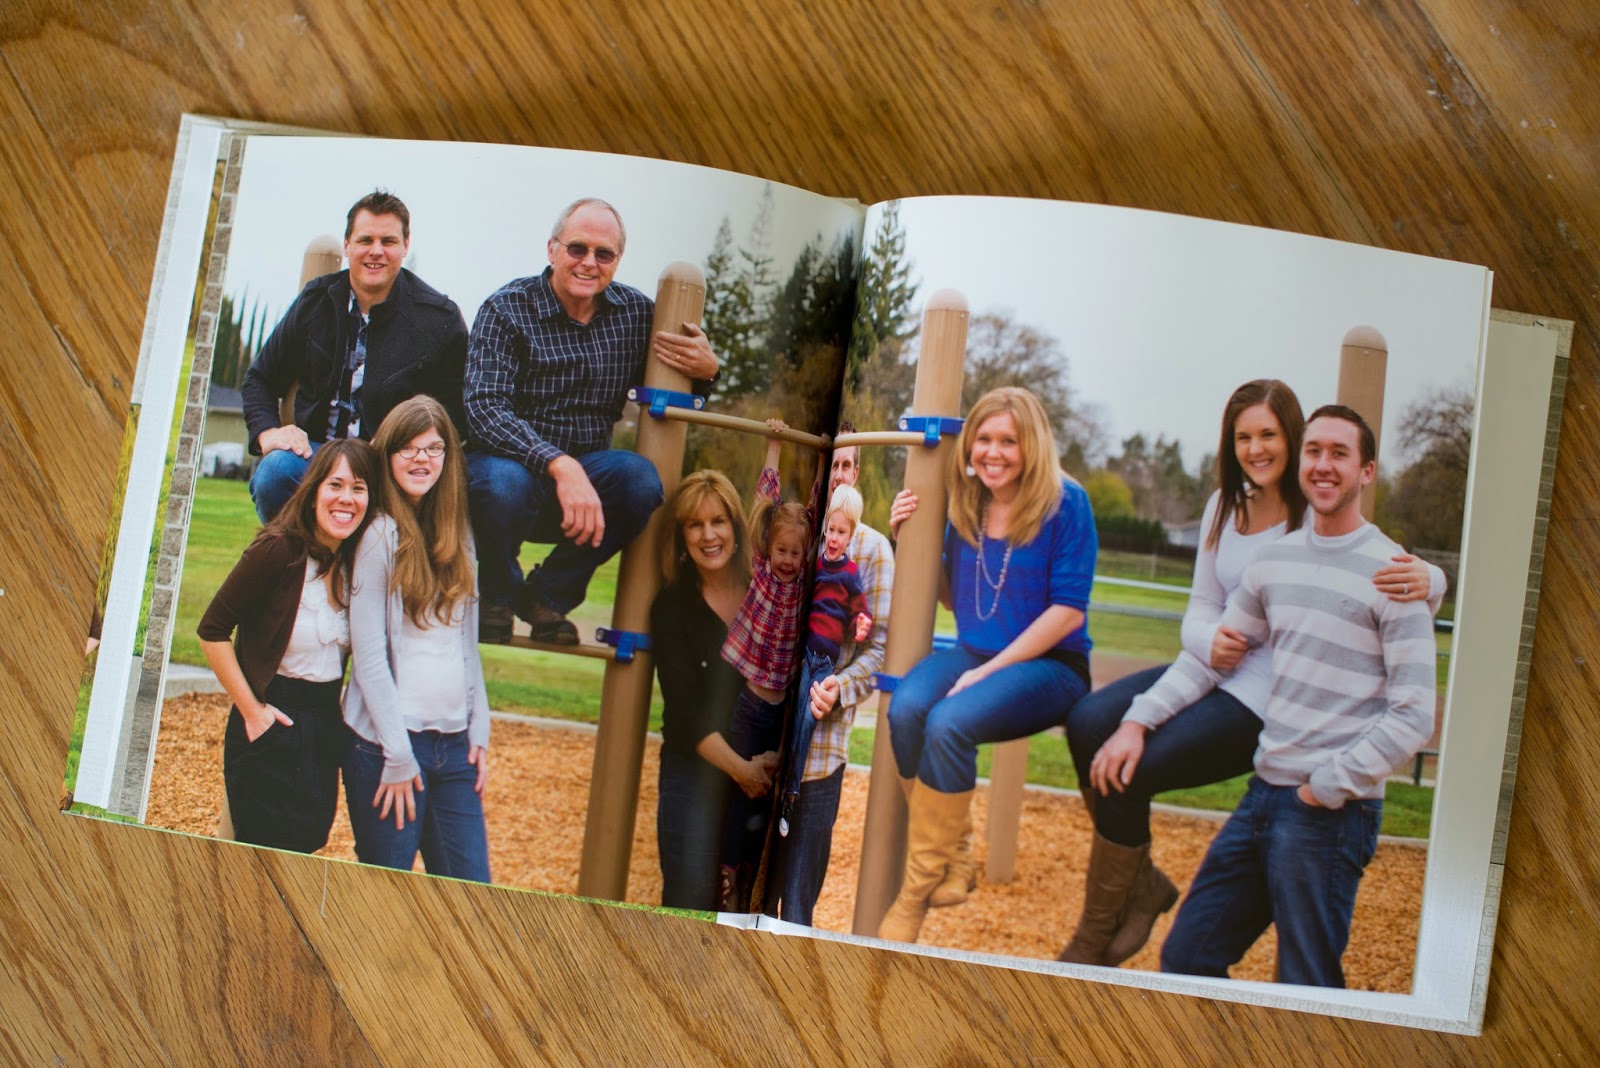 Family Photo Session Photo Book--create a photo book from your professional family photo session to be able to look back on for years to come! When you change out the photos in frames around the house, you will still have this book to flip through!